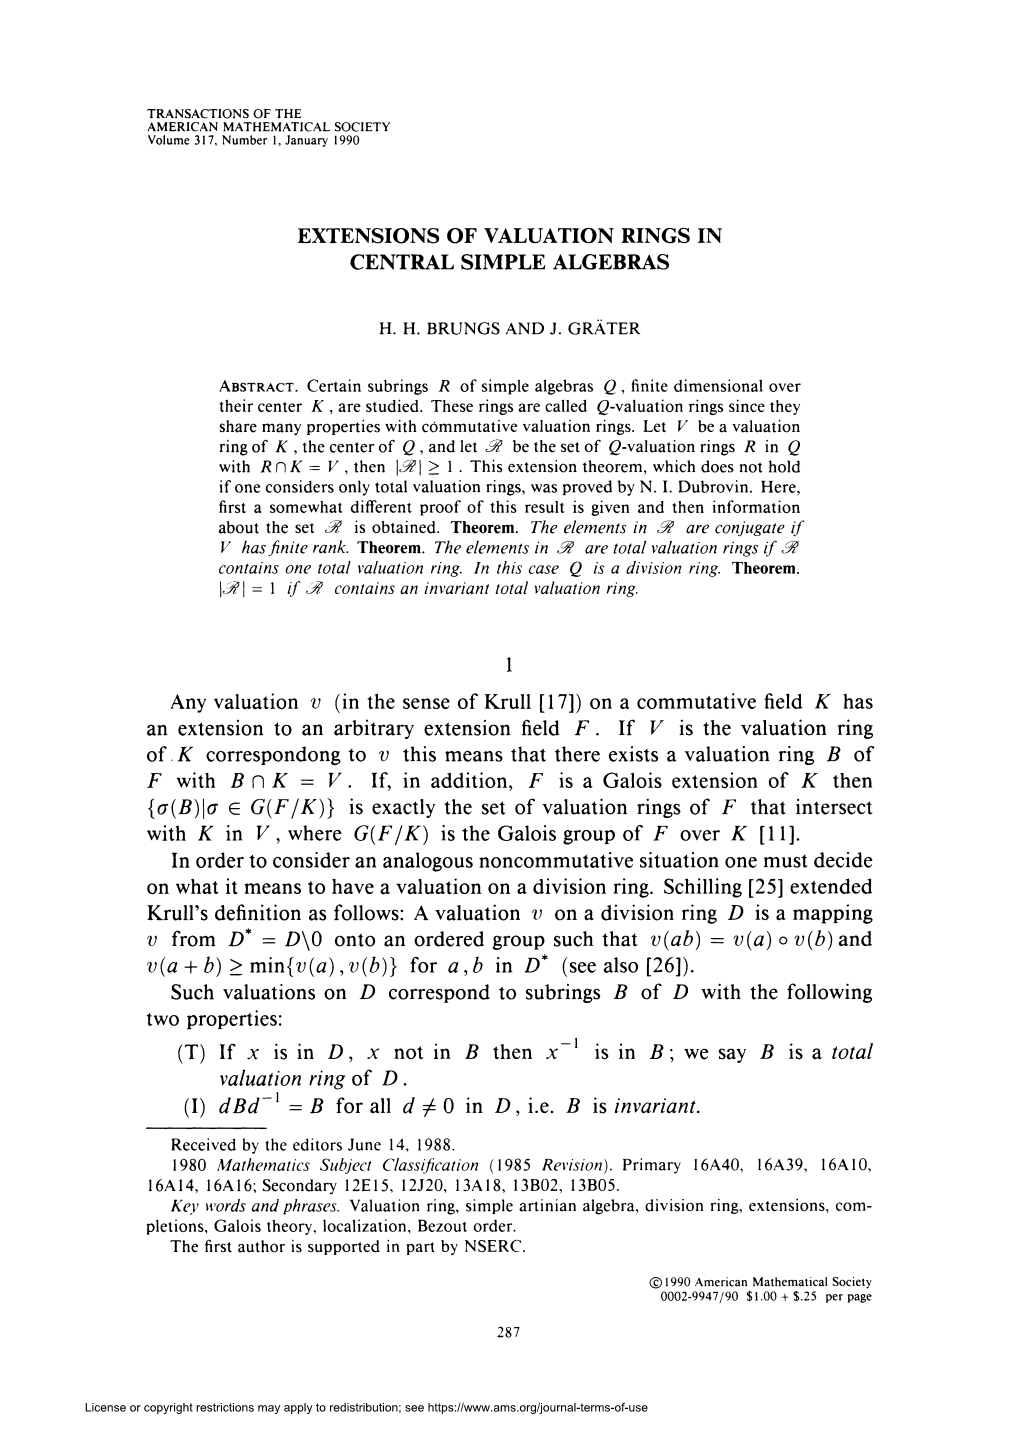 Extensions of Valuation Rings in Central Simple Algebras